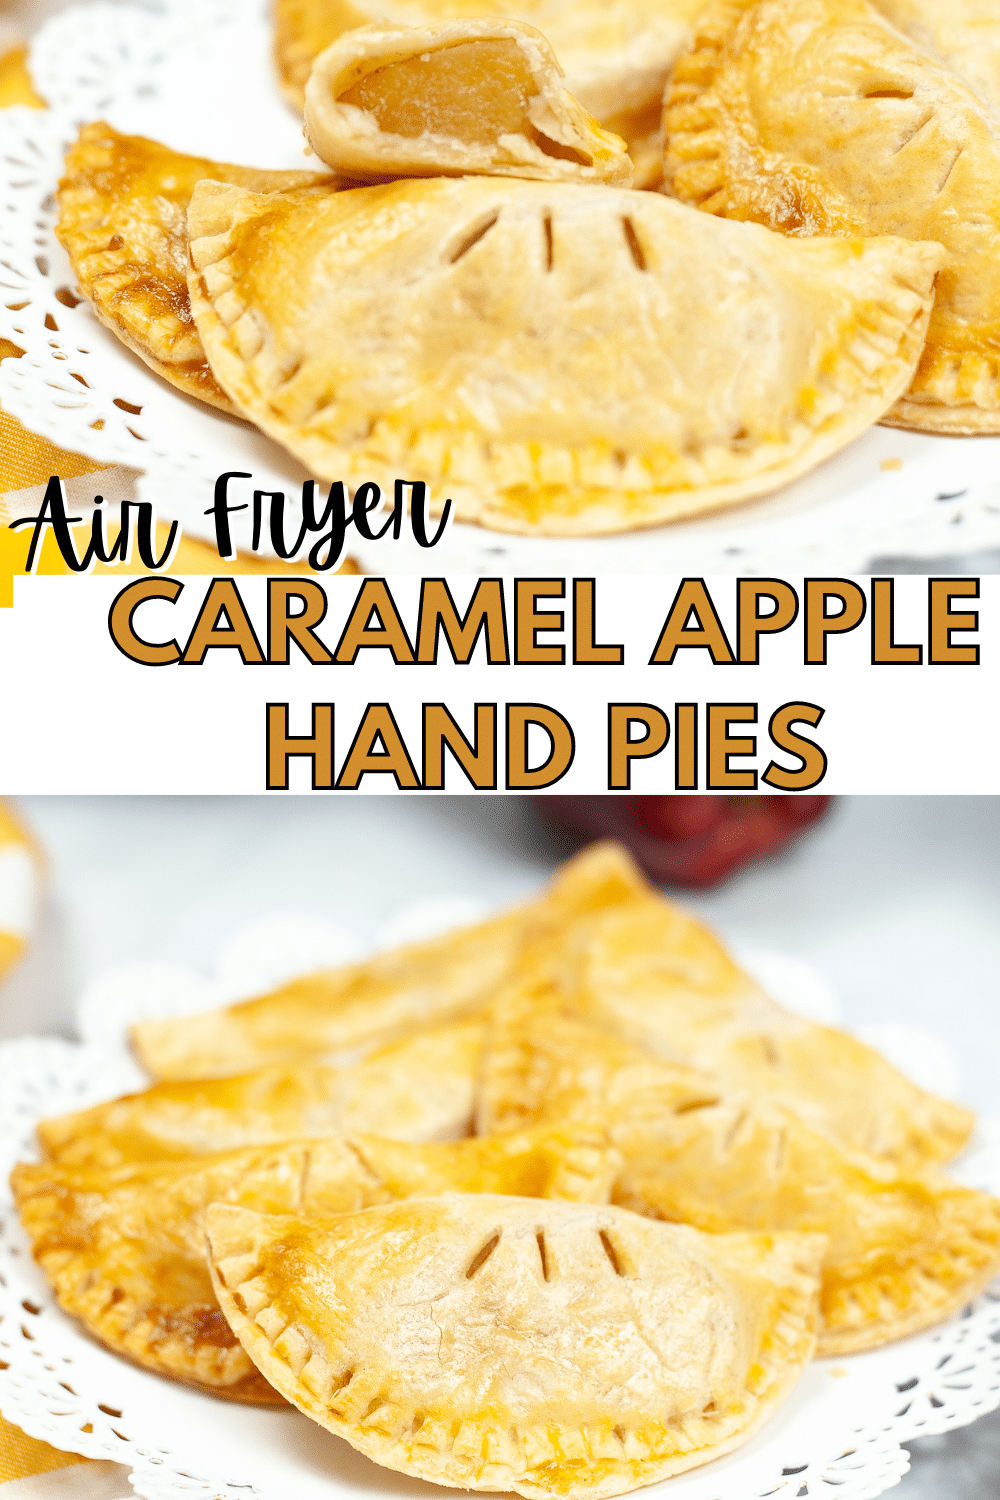 These Air Fryer Caramel Apple Hand Pies are packed with flavor and so delicious! They only take a few minutes to cook in the air fryer. #airfryer #caramelapple #applehandpie #dessert #recipe via @wondermomwannab